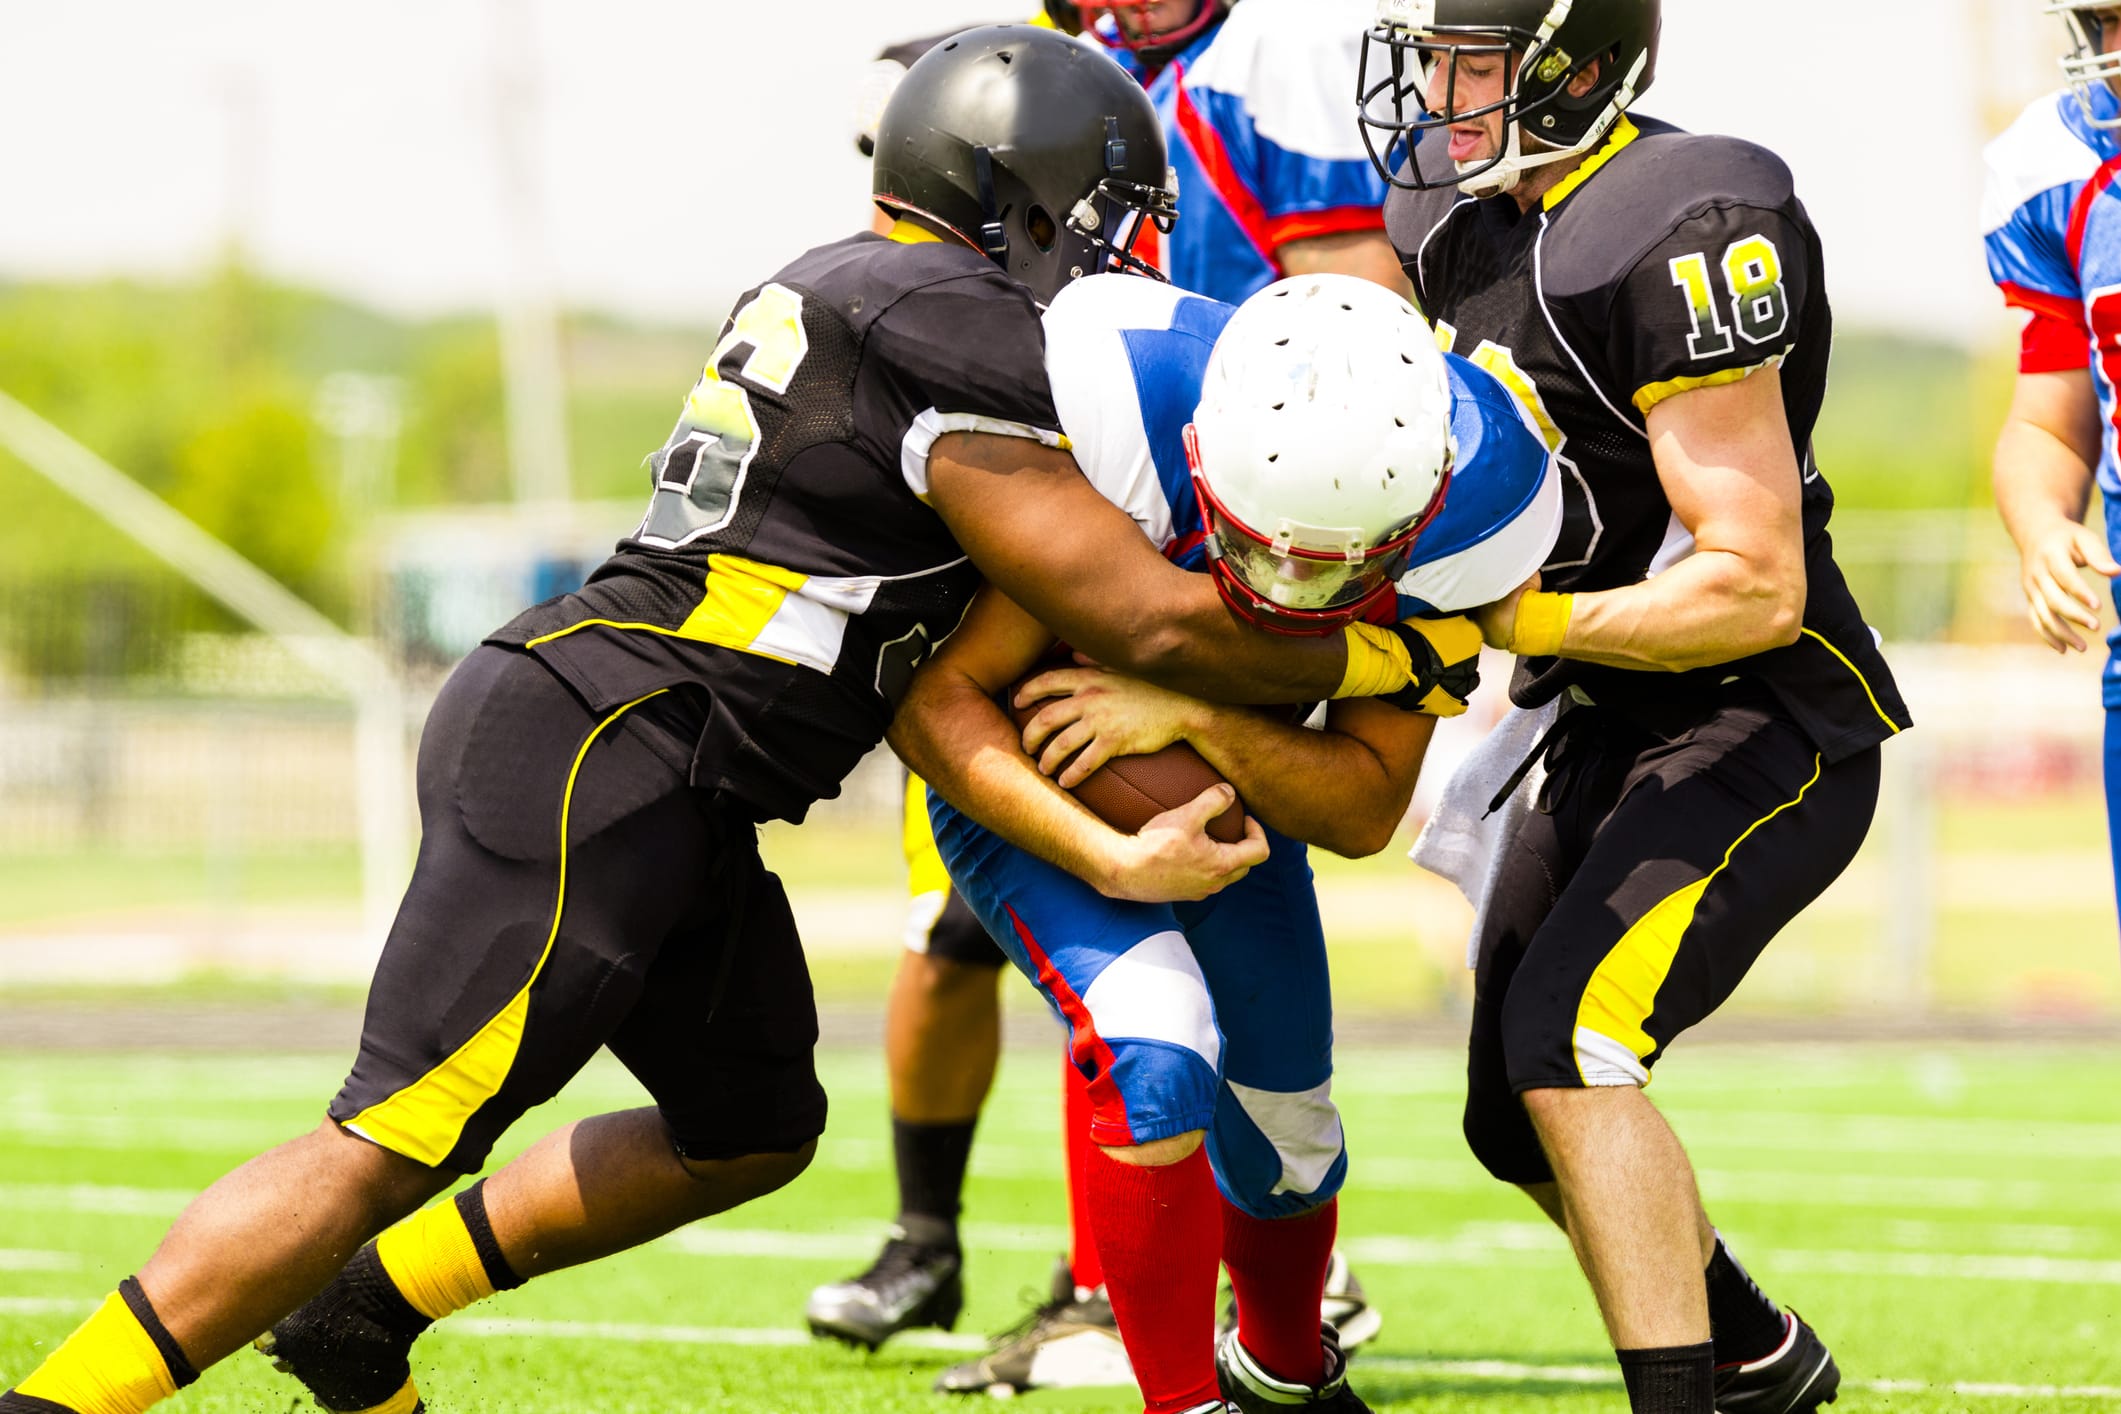 American football as the most important sport at the college